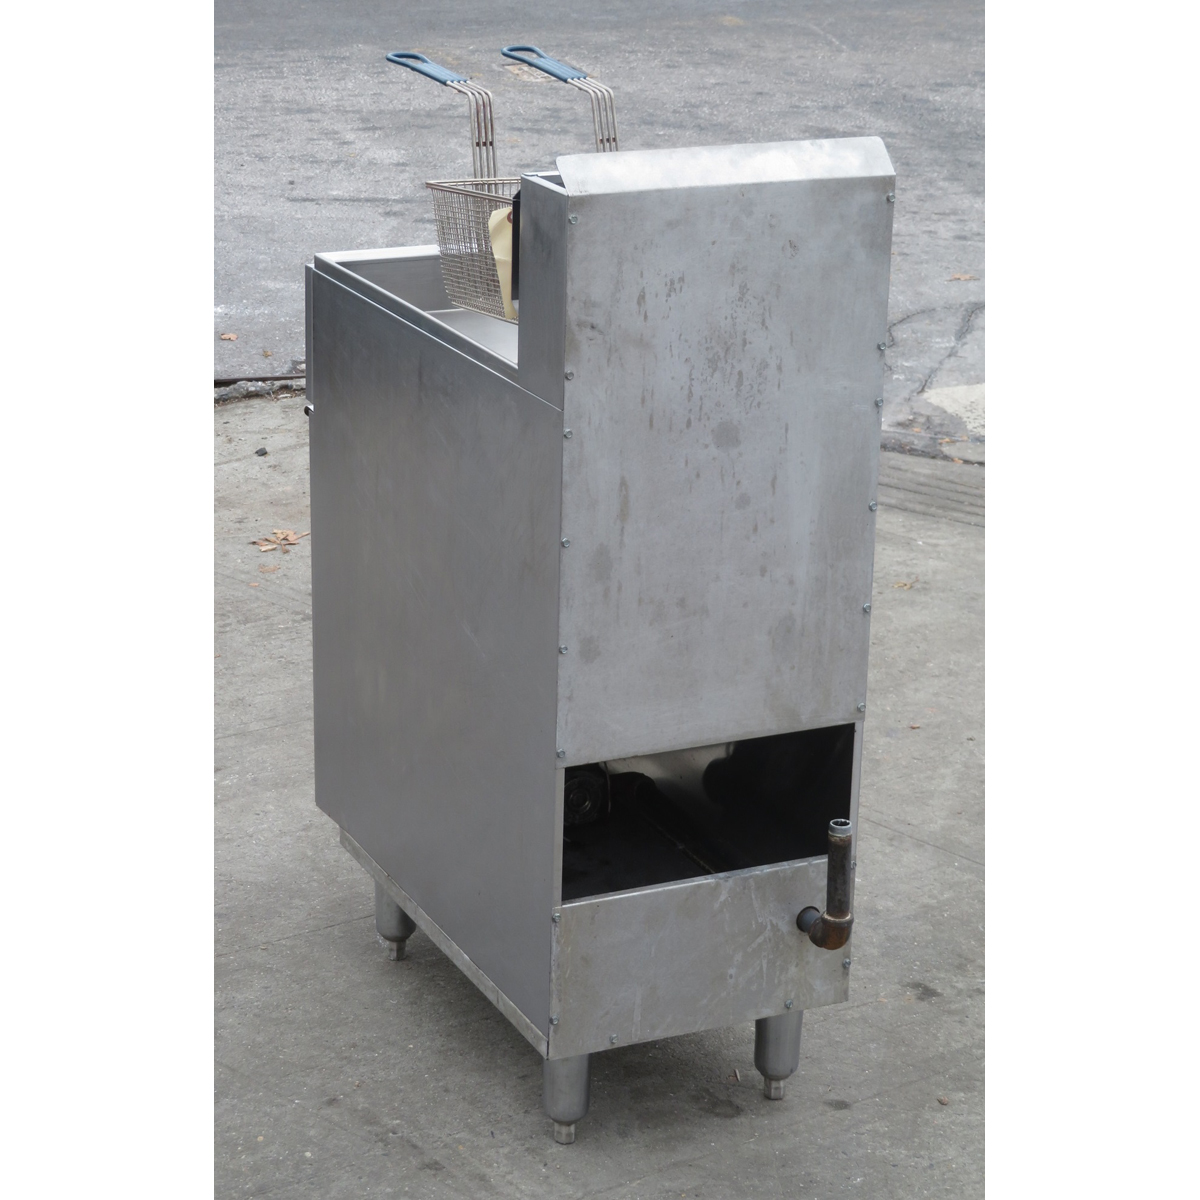 American Range AF-45 Natural Gas Fryer, Used Very Good Condition image 2